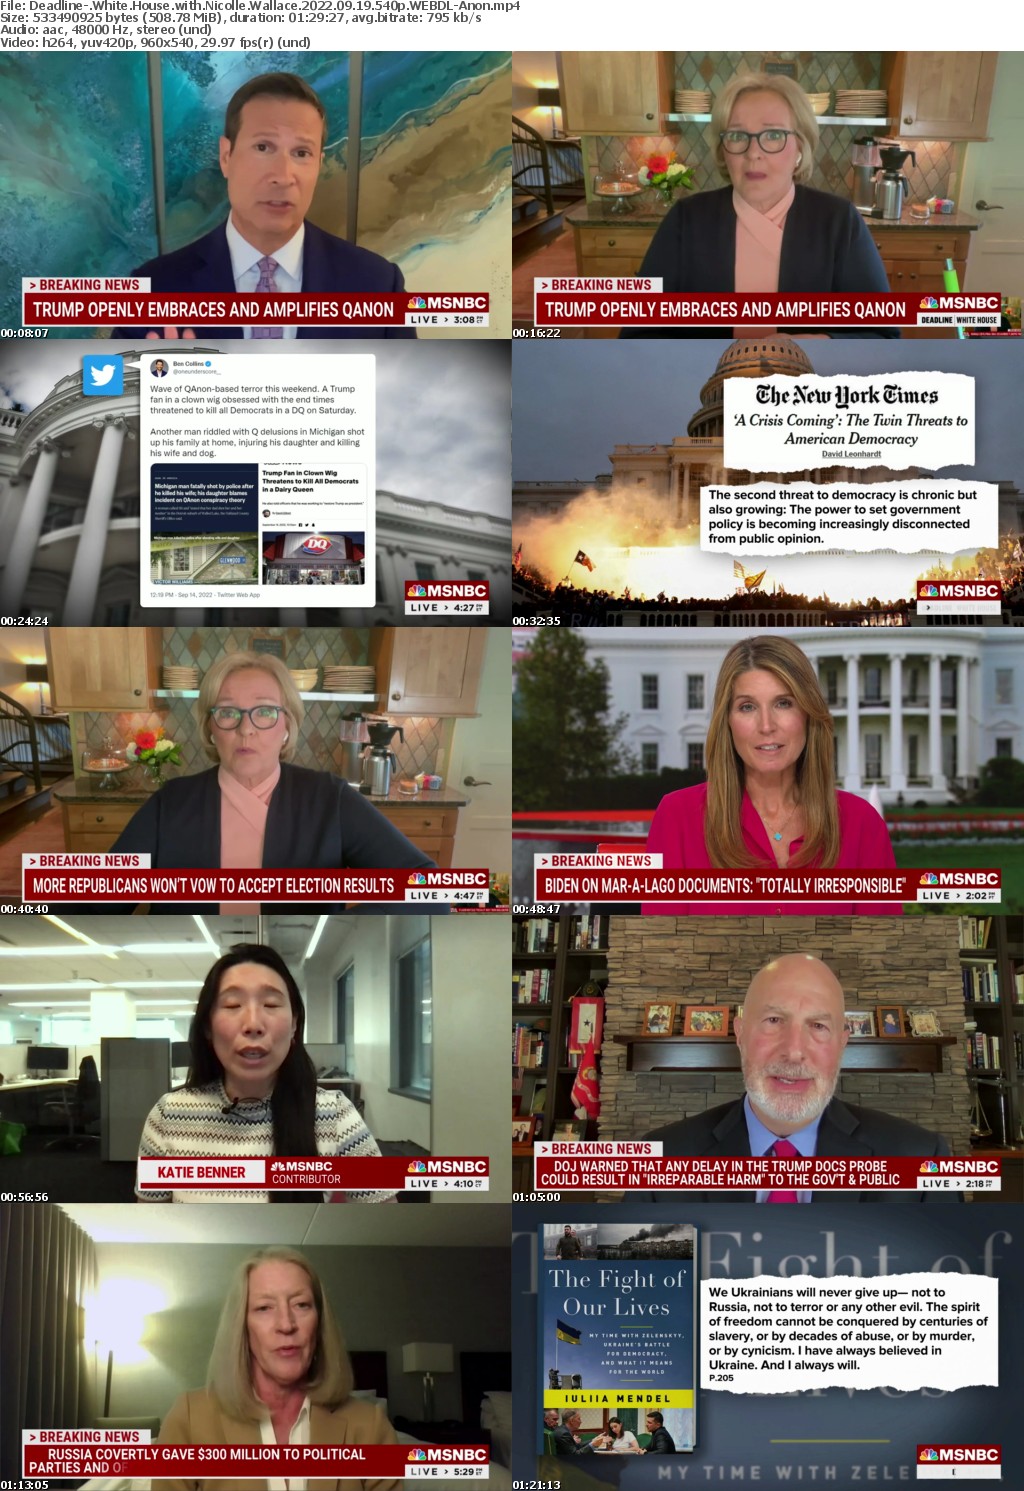 Deadline- White House with Nicolle Wallace 2022 09 19 540p WEBDL-Anon